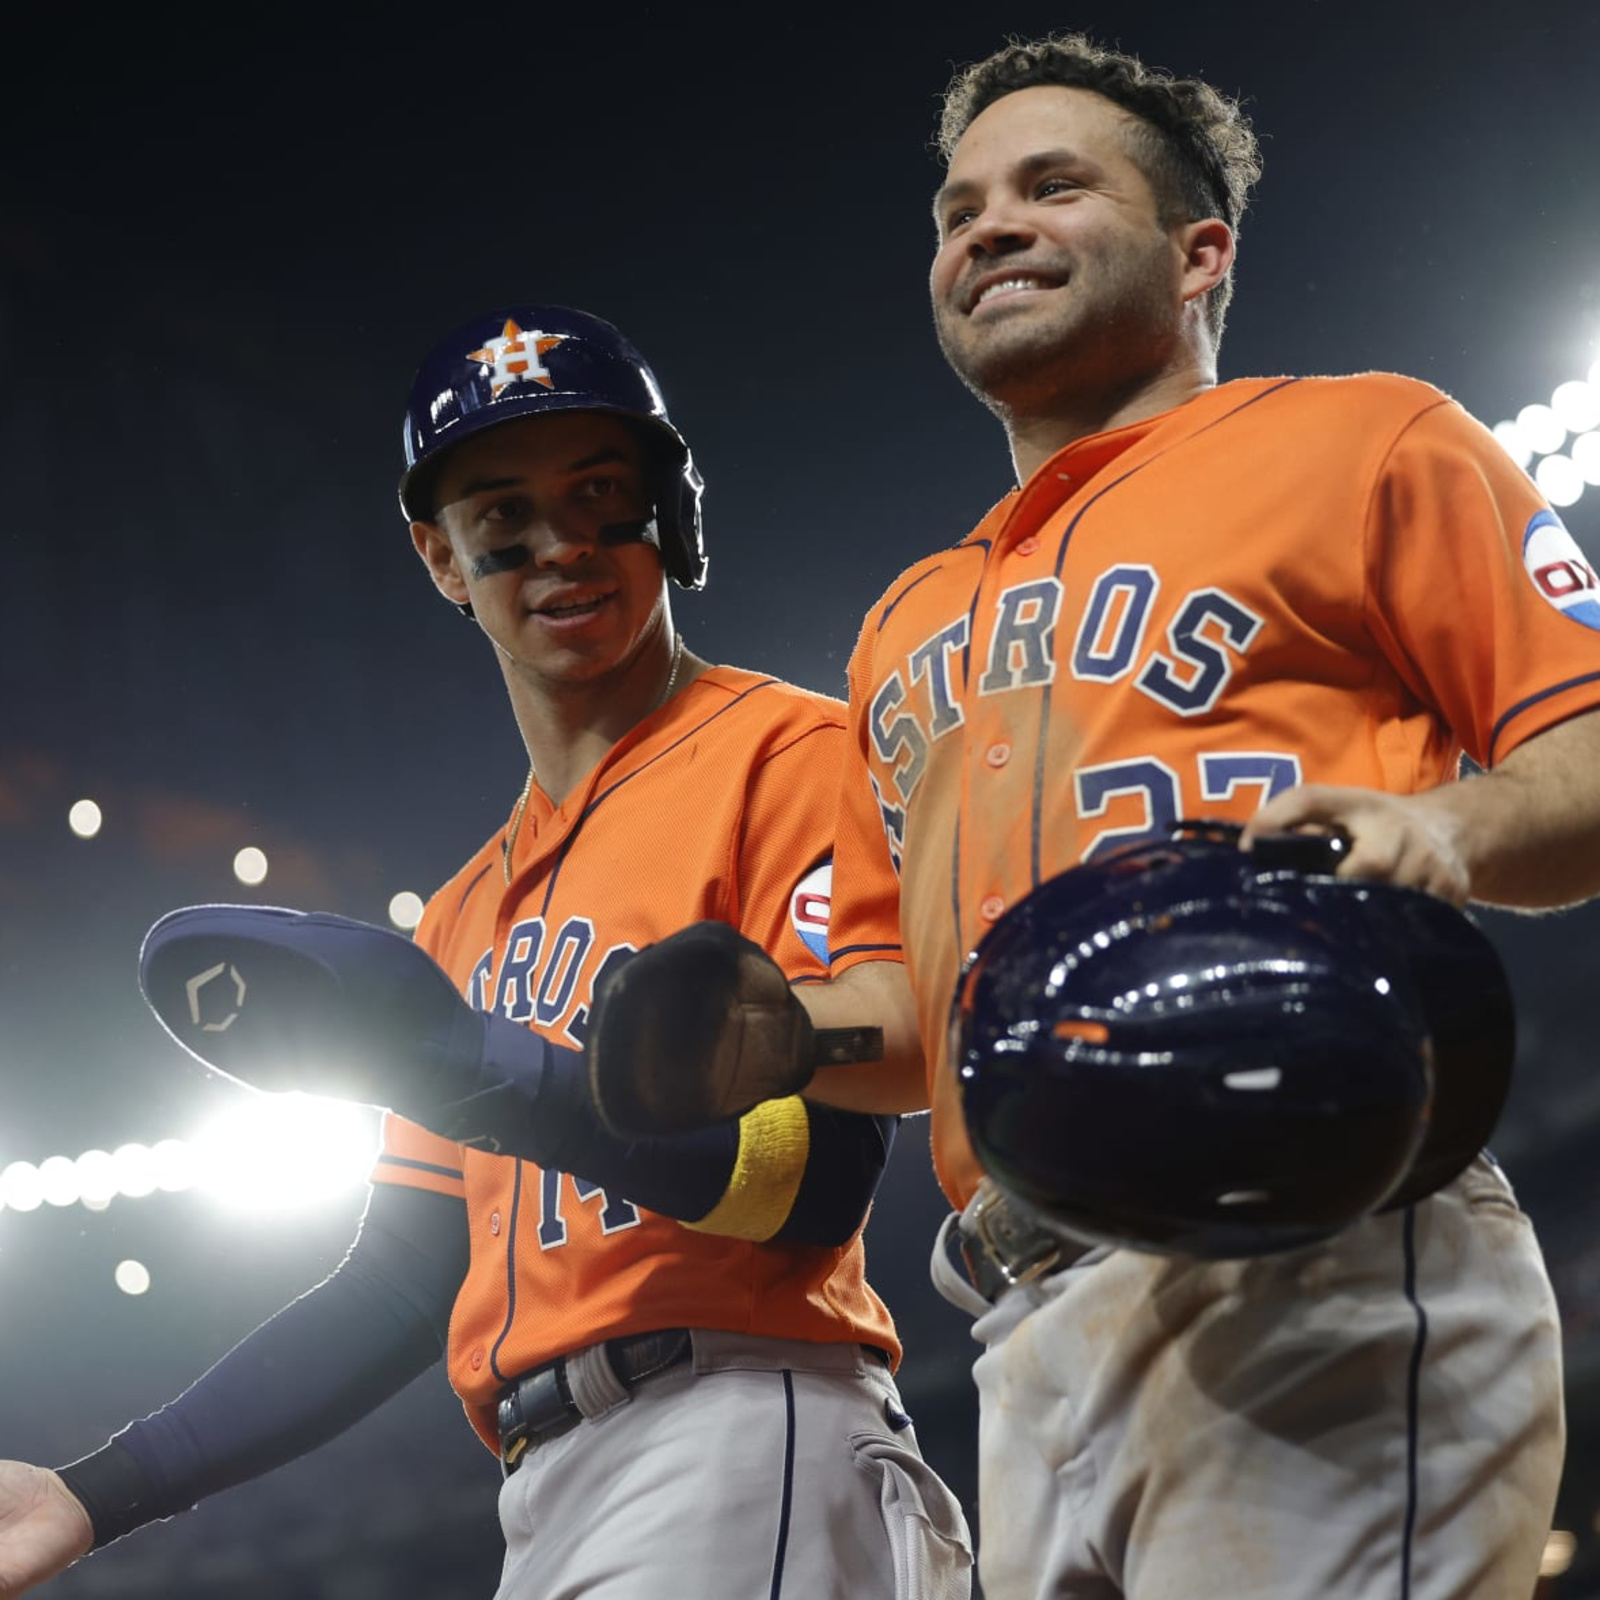 Moments that made us literally love Jose Altuve